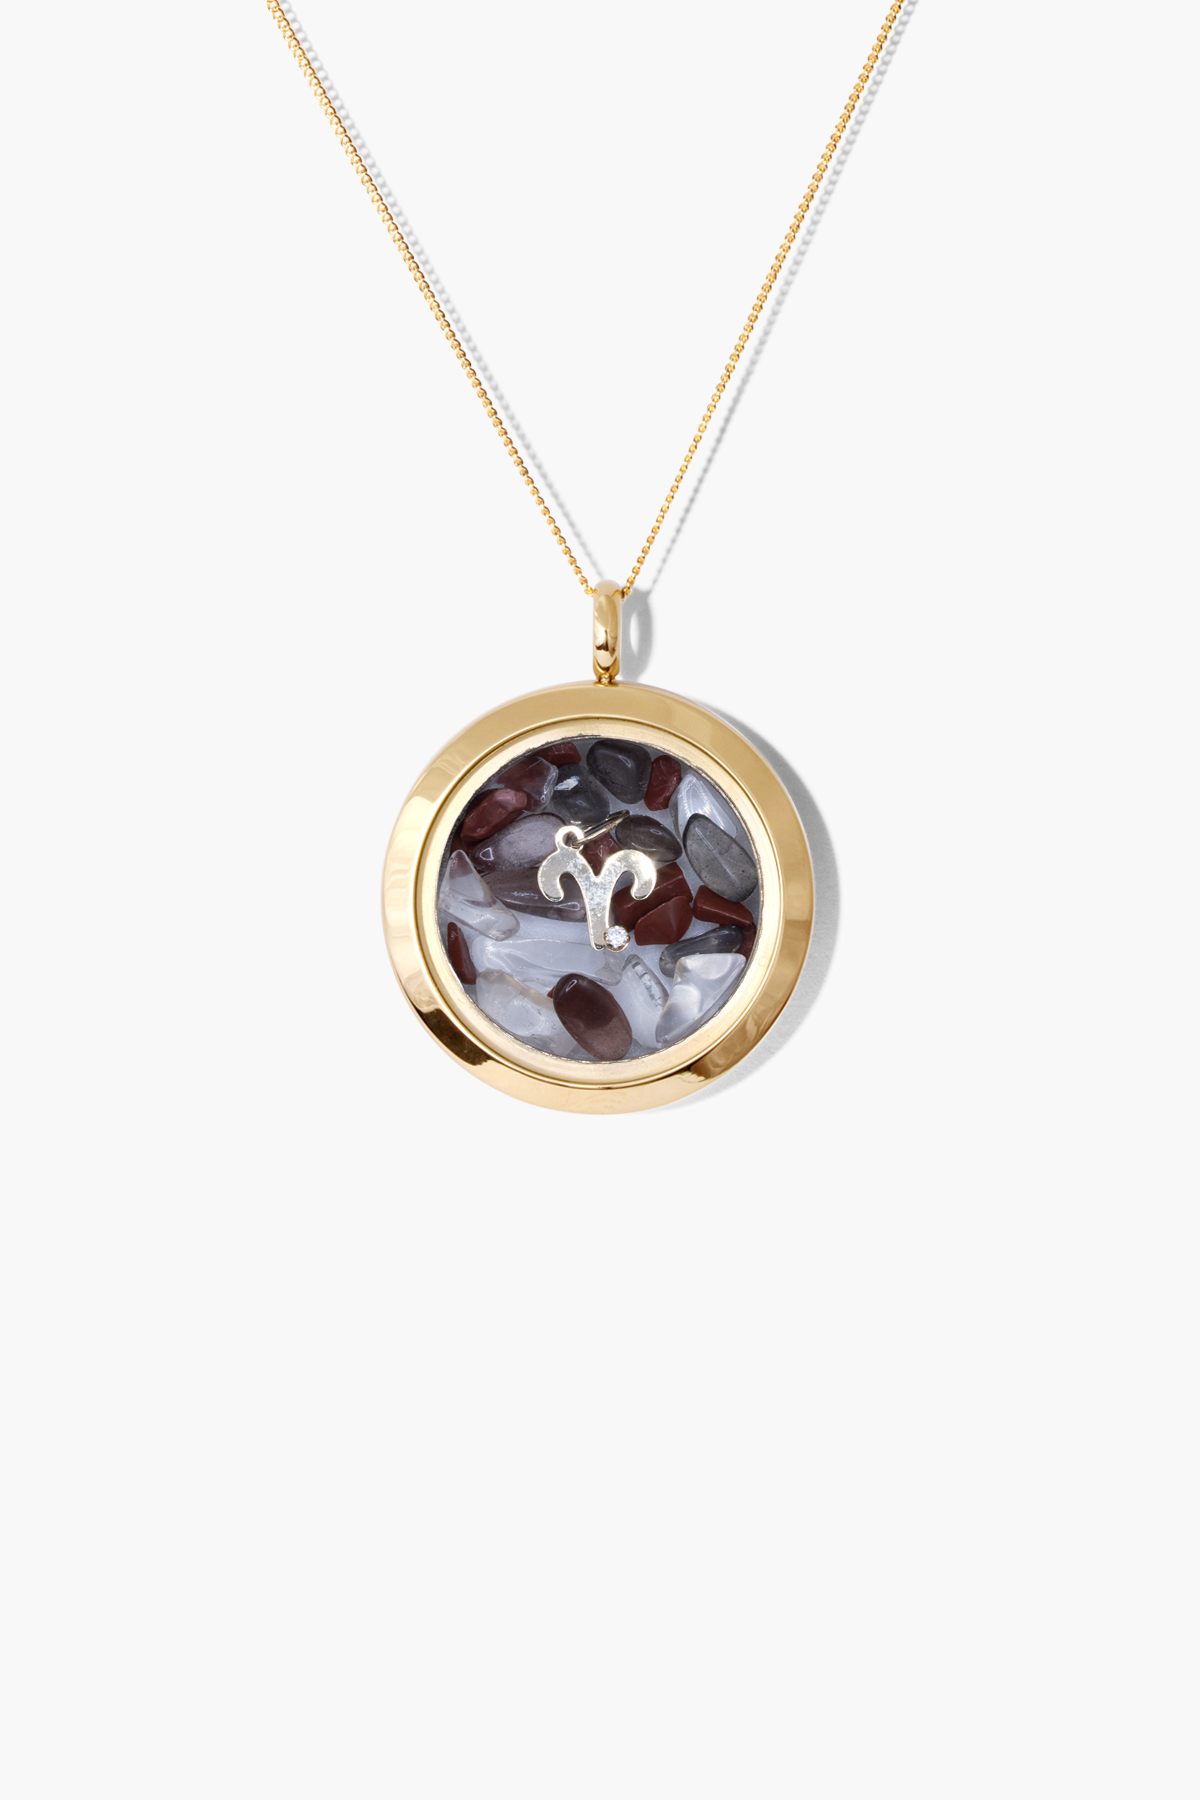 Aries Lucky Charm Locket 14K REAL Gold